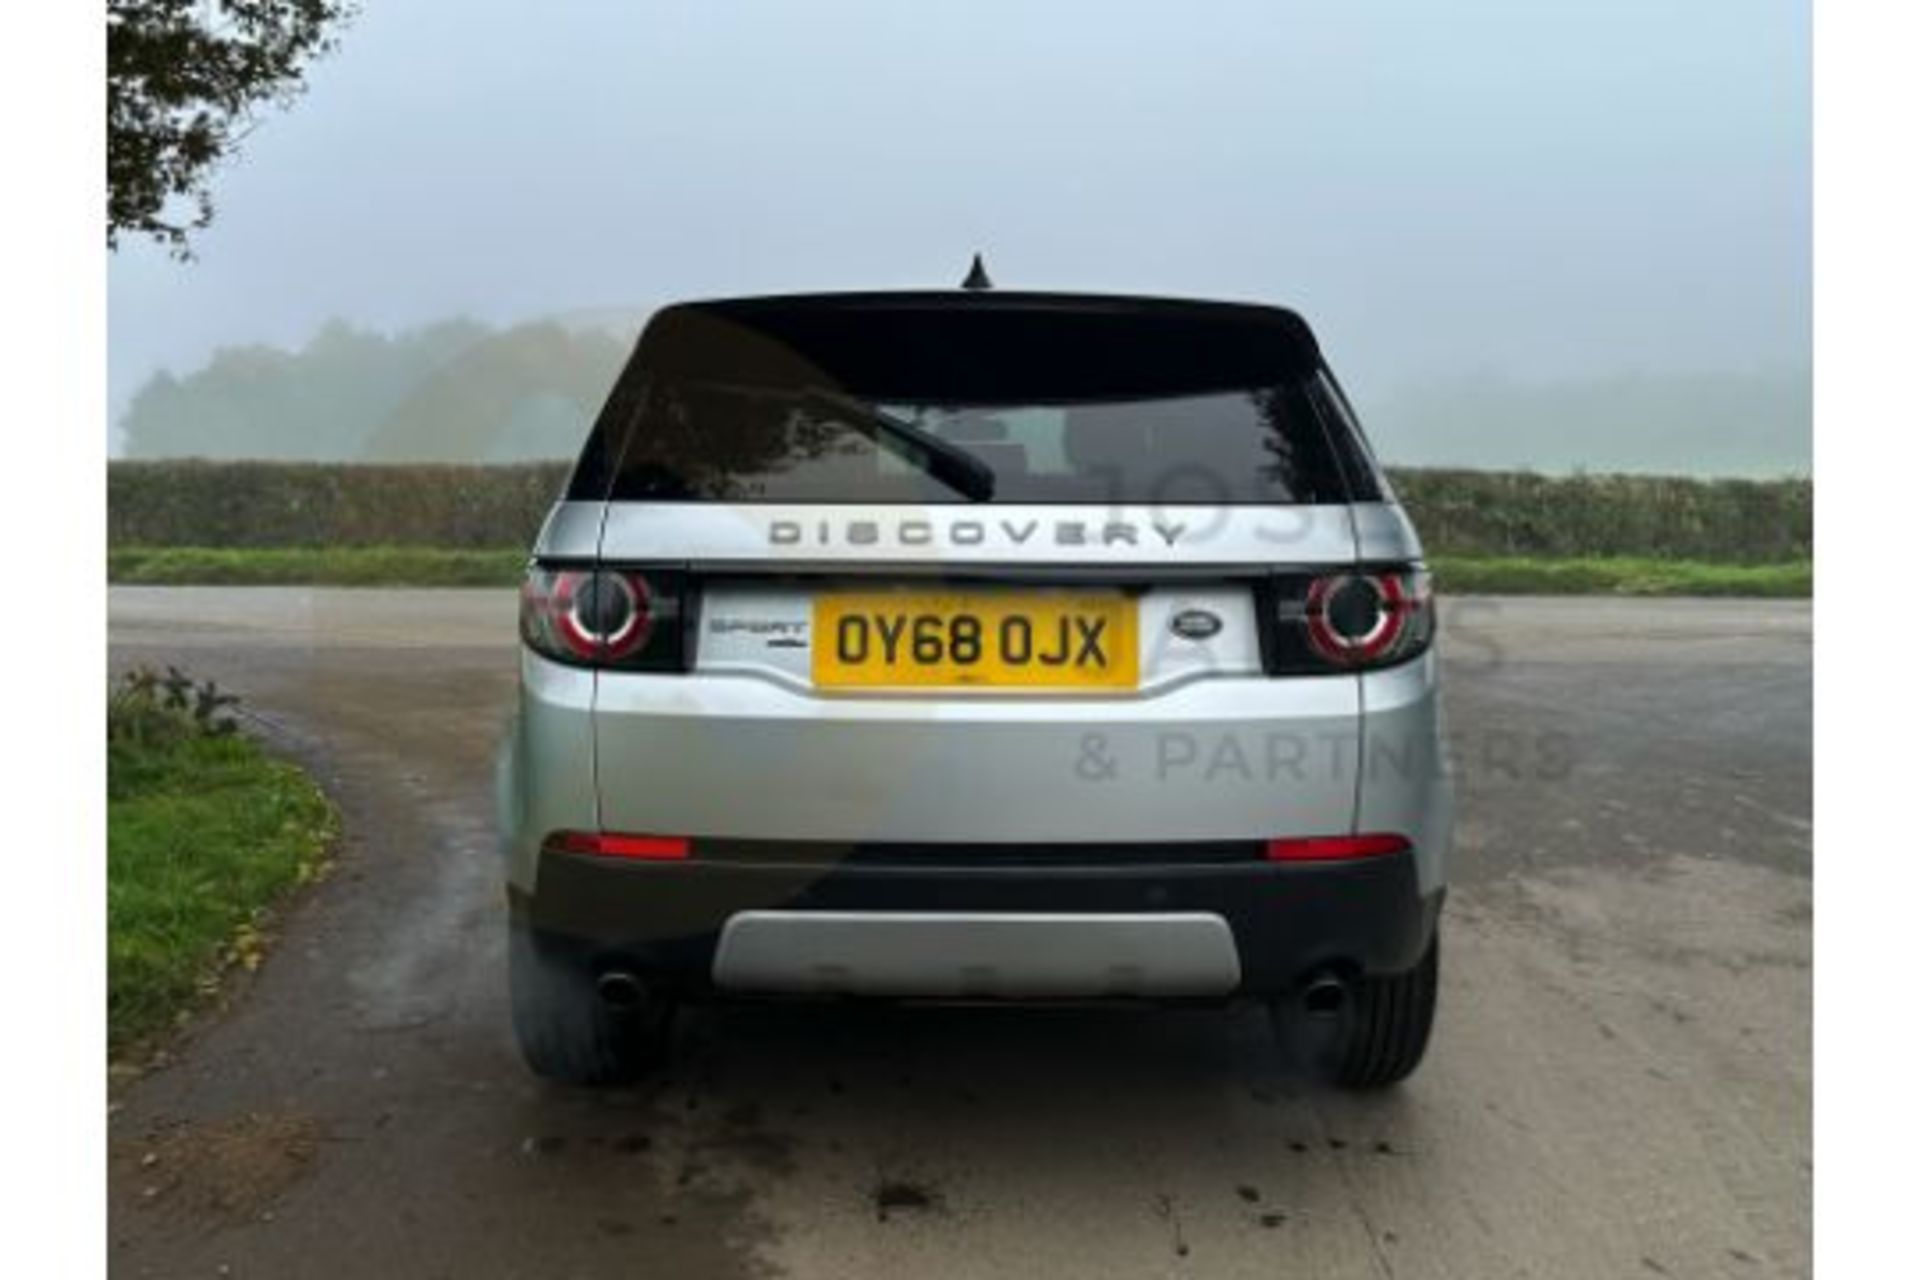 (ON SALE) LANDROVER DISCOVERY SPORT "HSE" EDITION 2.0 TD4 (180) AUTOMATIC - 68 REG - PAN ROOF - Image 10 of 51